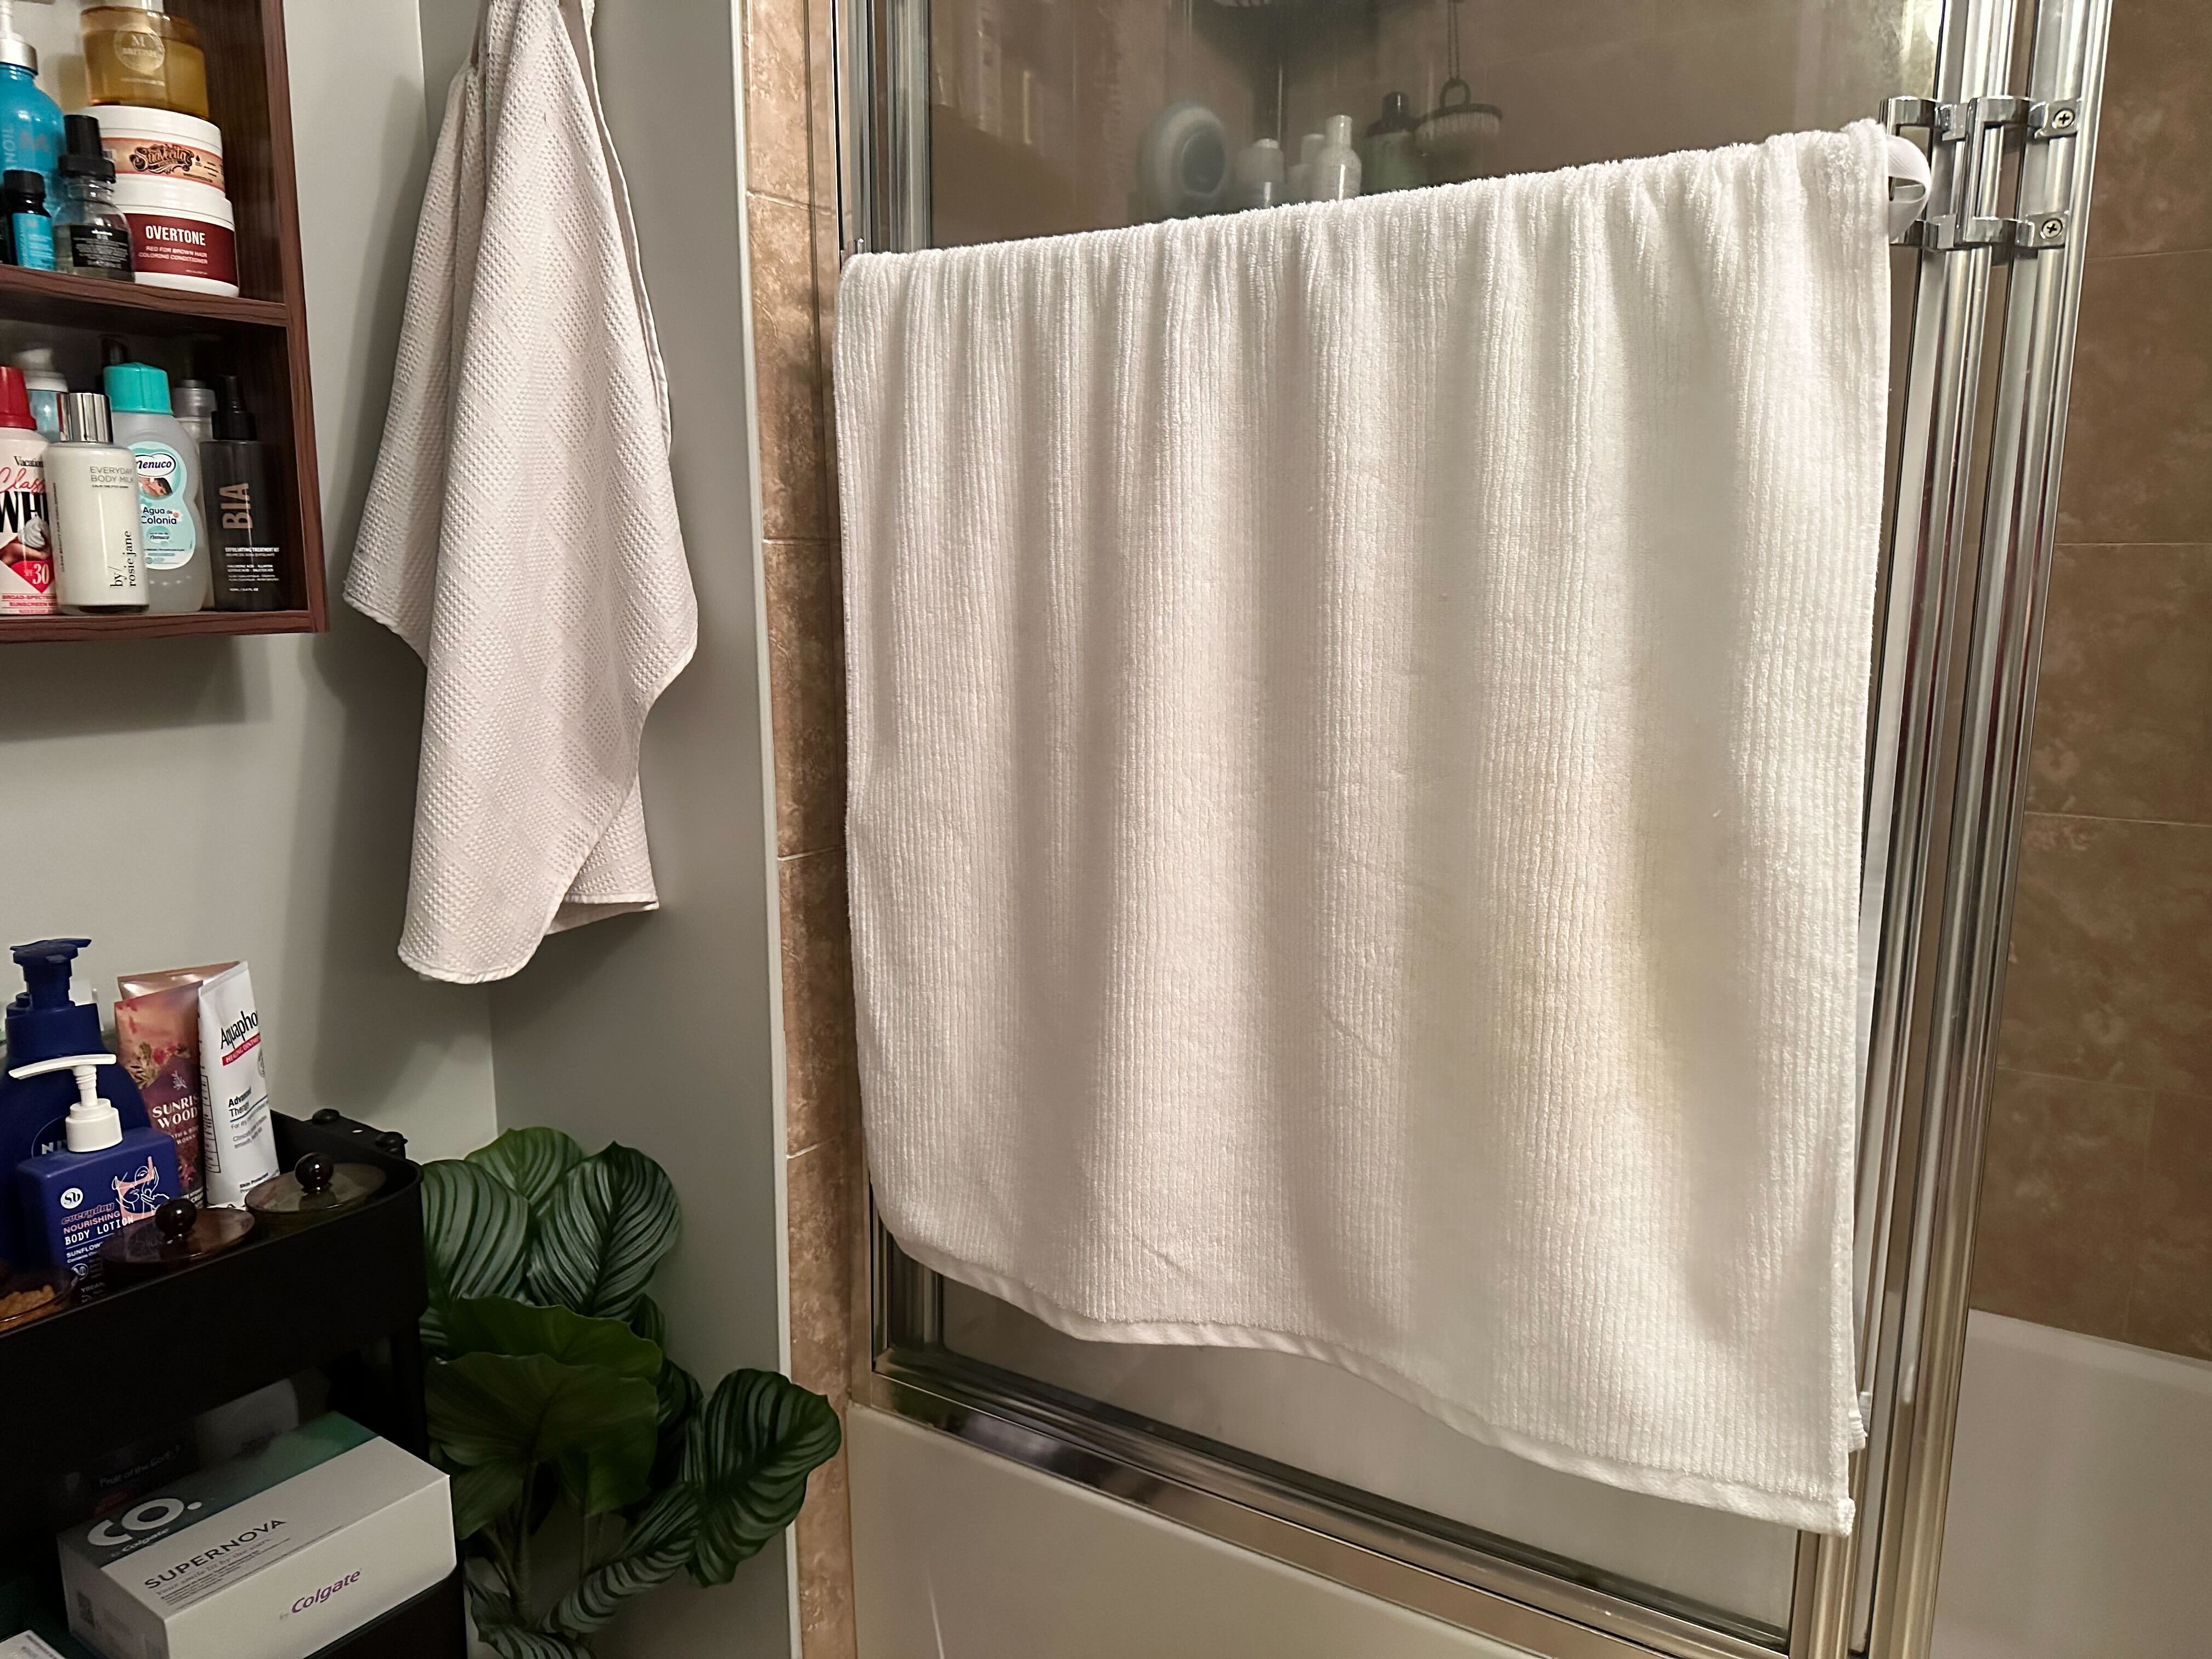 Why I Love the Cozy Earth's Ribbed Terry Bath Towels: Tried & Tested